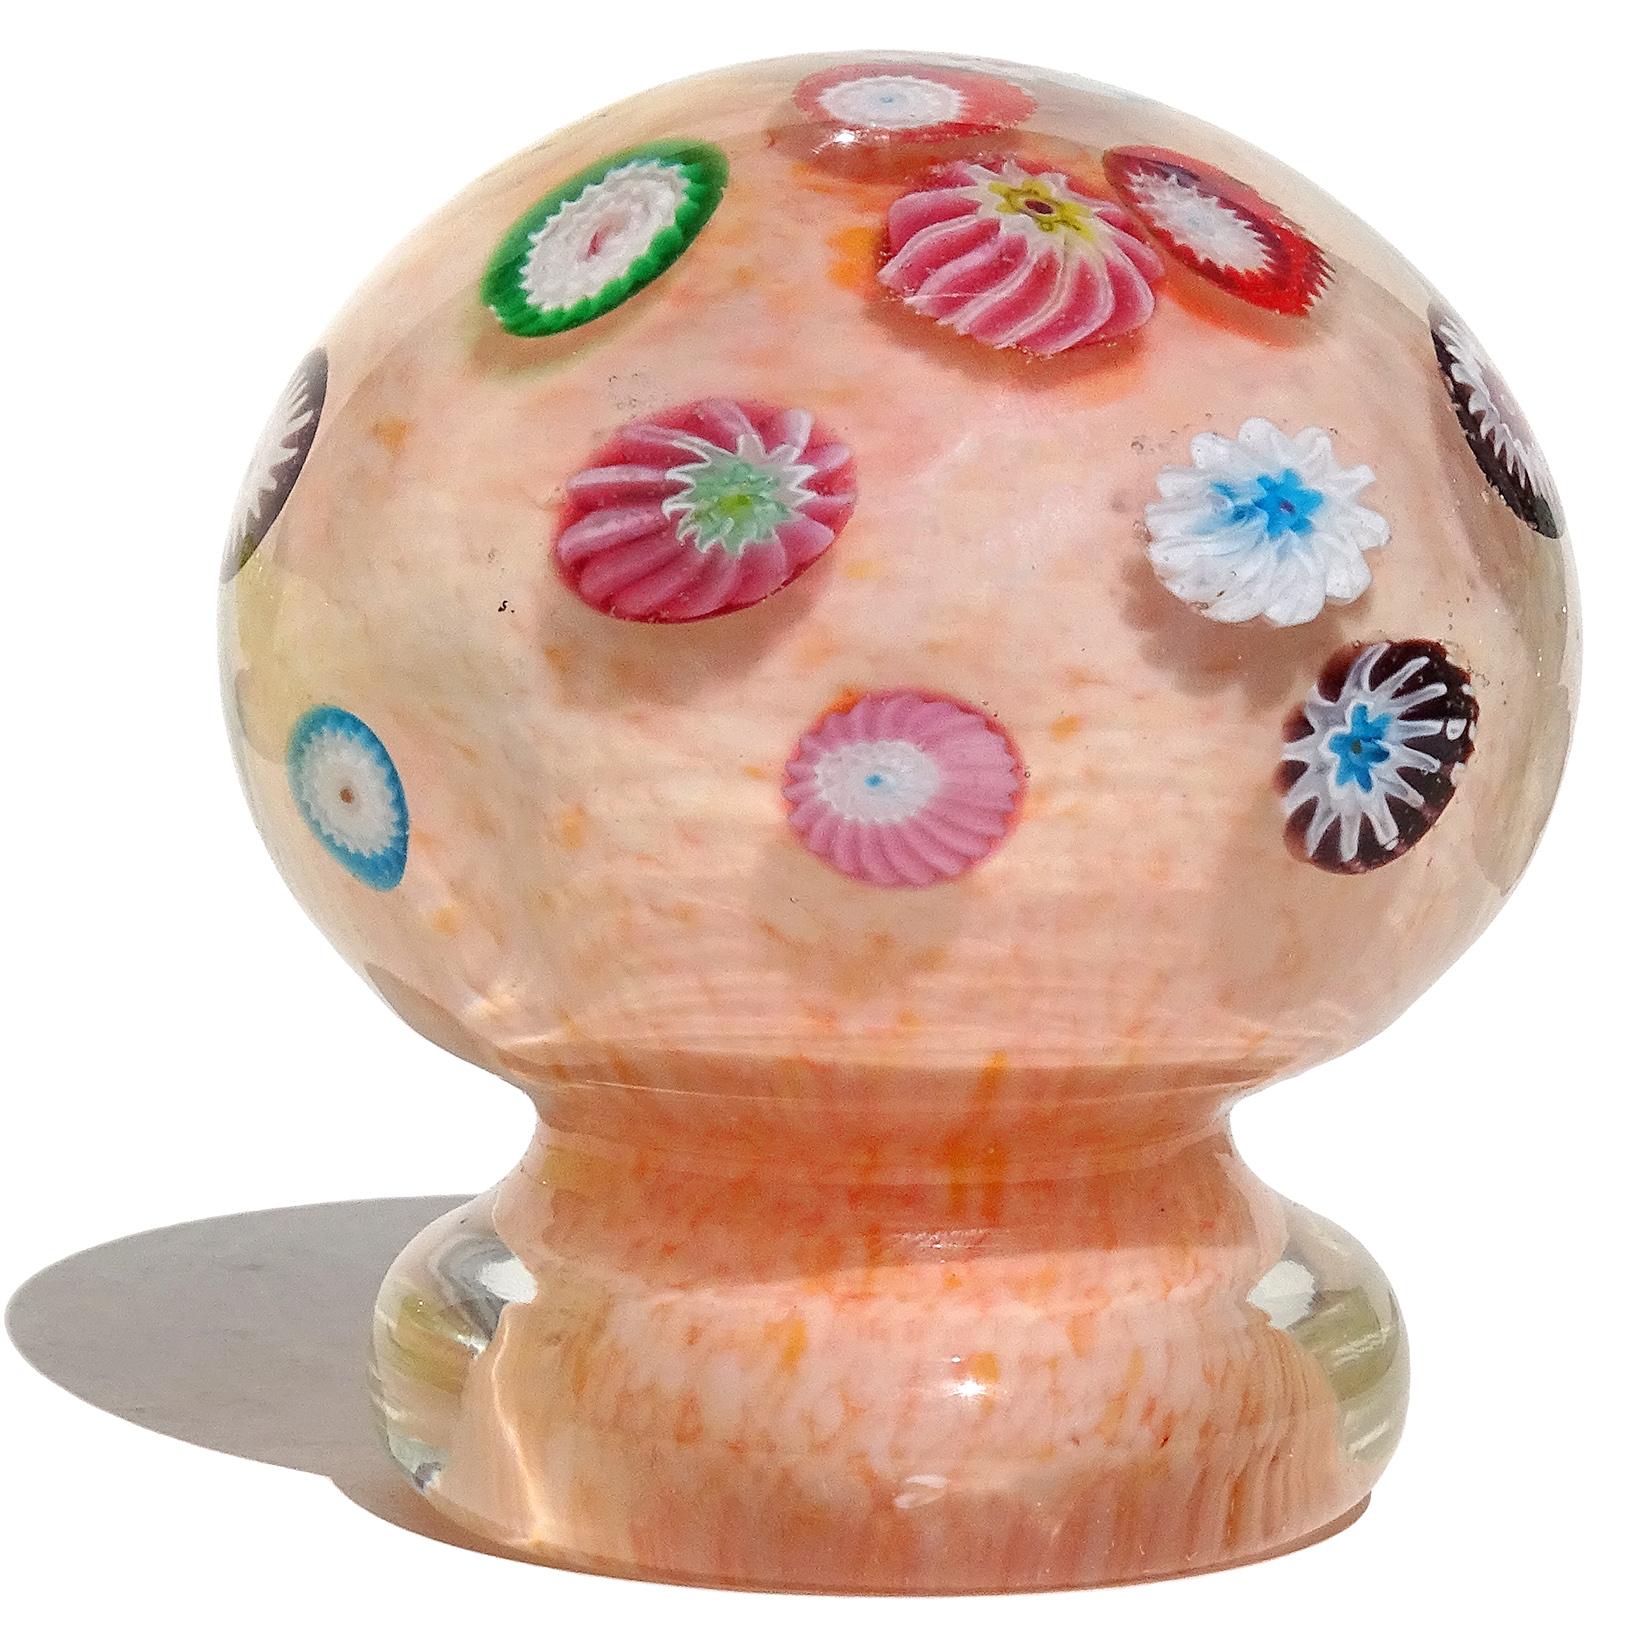 Beautiful vintage Murano hand blown millefiori flower design Italian art glass mushroom / toadstool paperweight. Documented to the Fratelli Toso company. The paperweight has flower murrine pieces floating inside the piece, in a rainbow of colors.